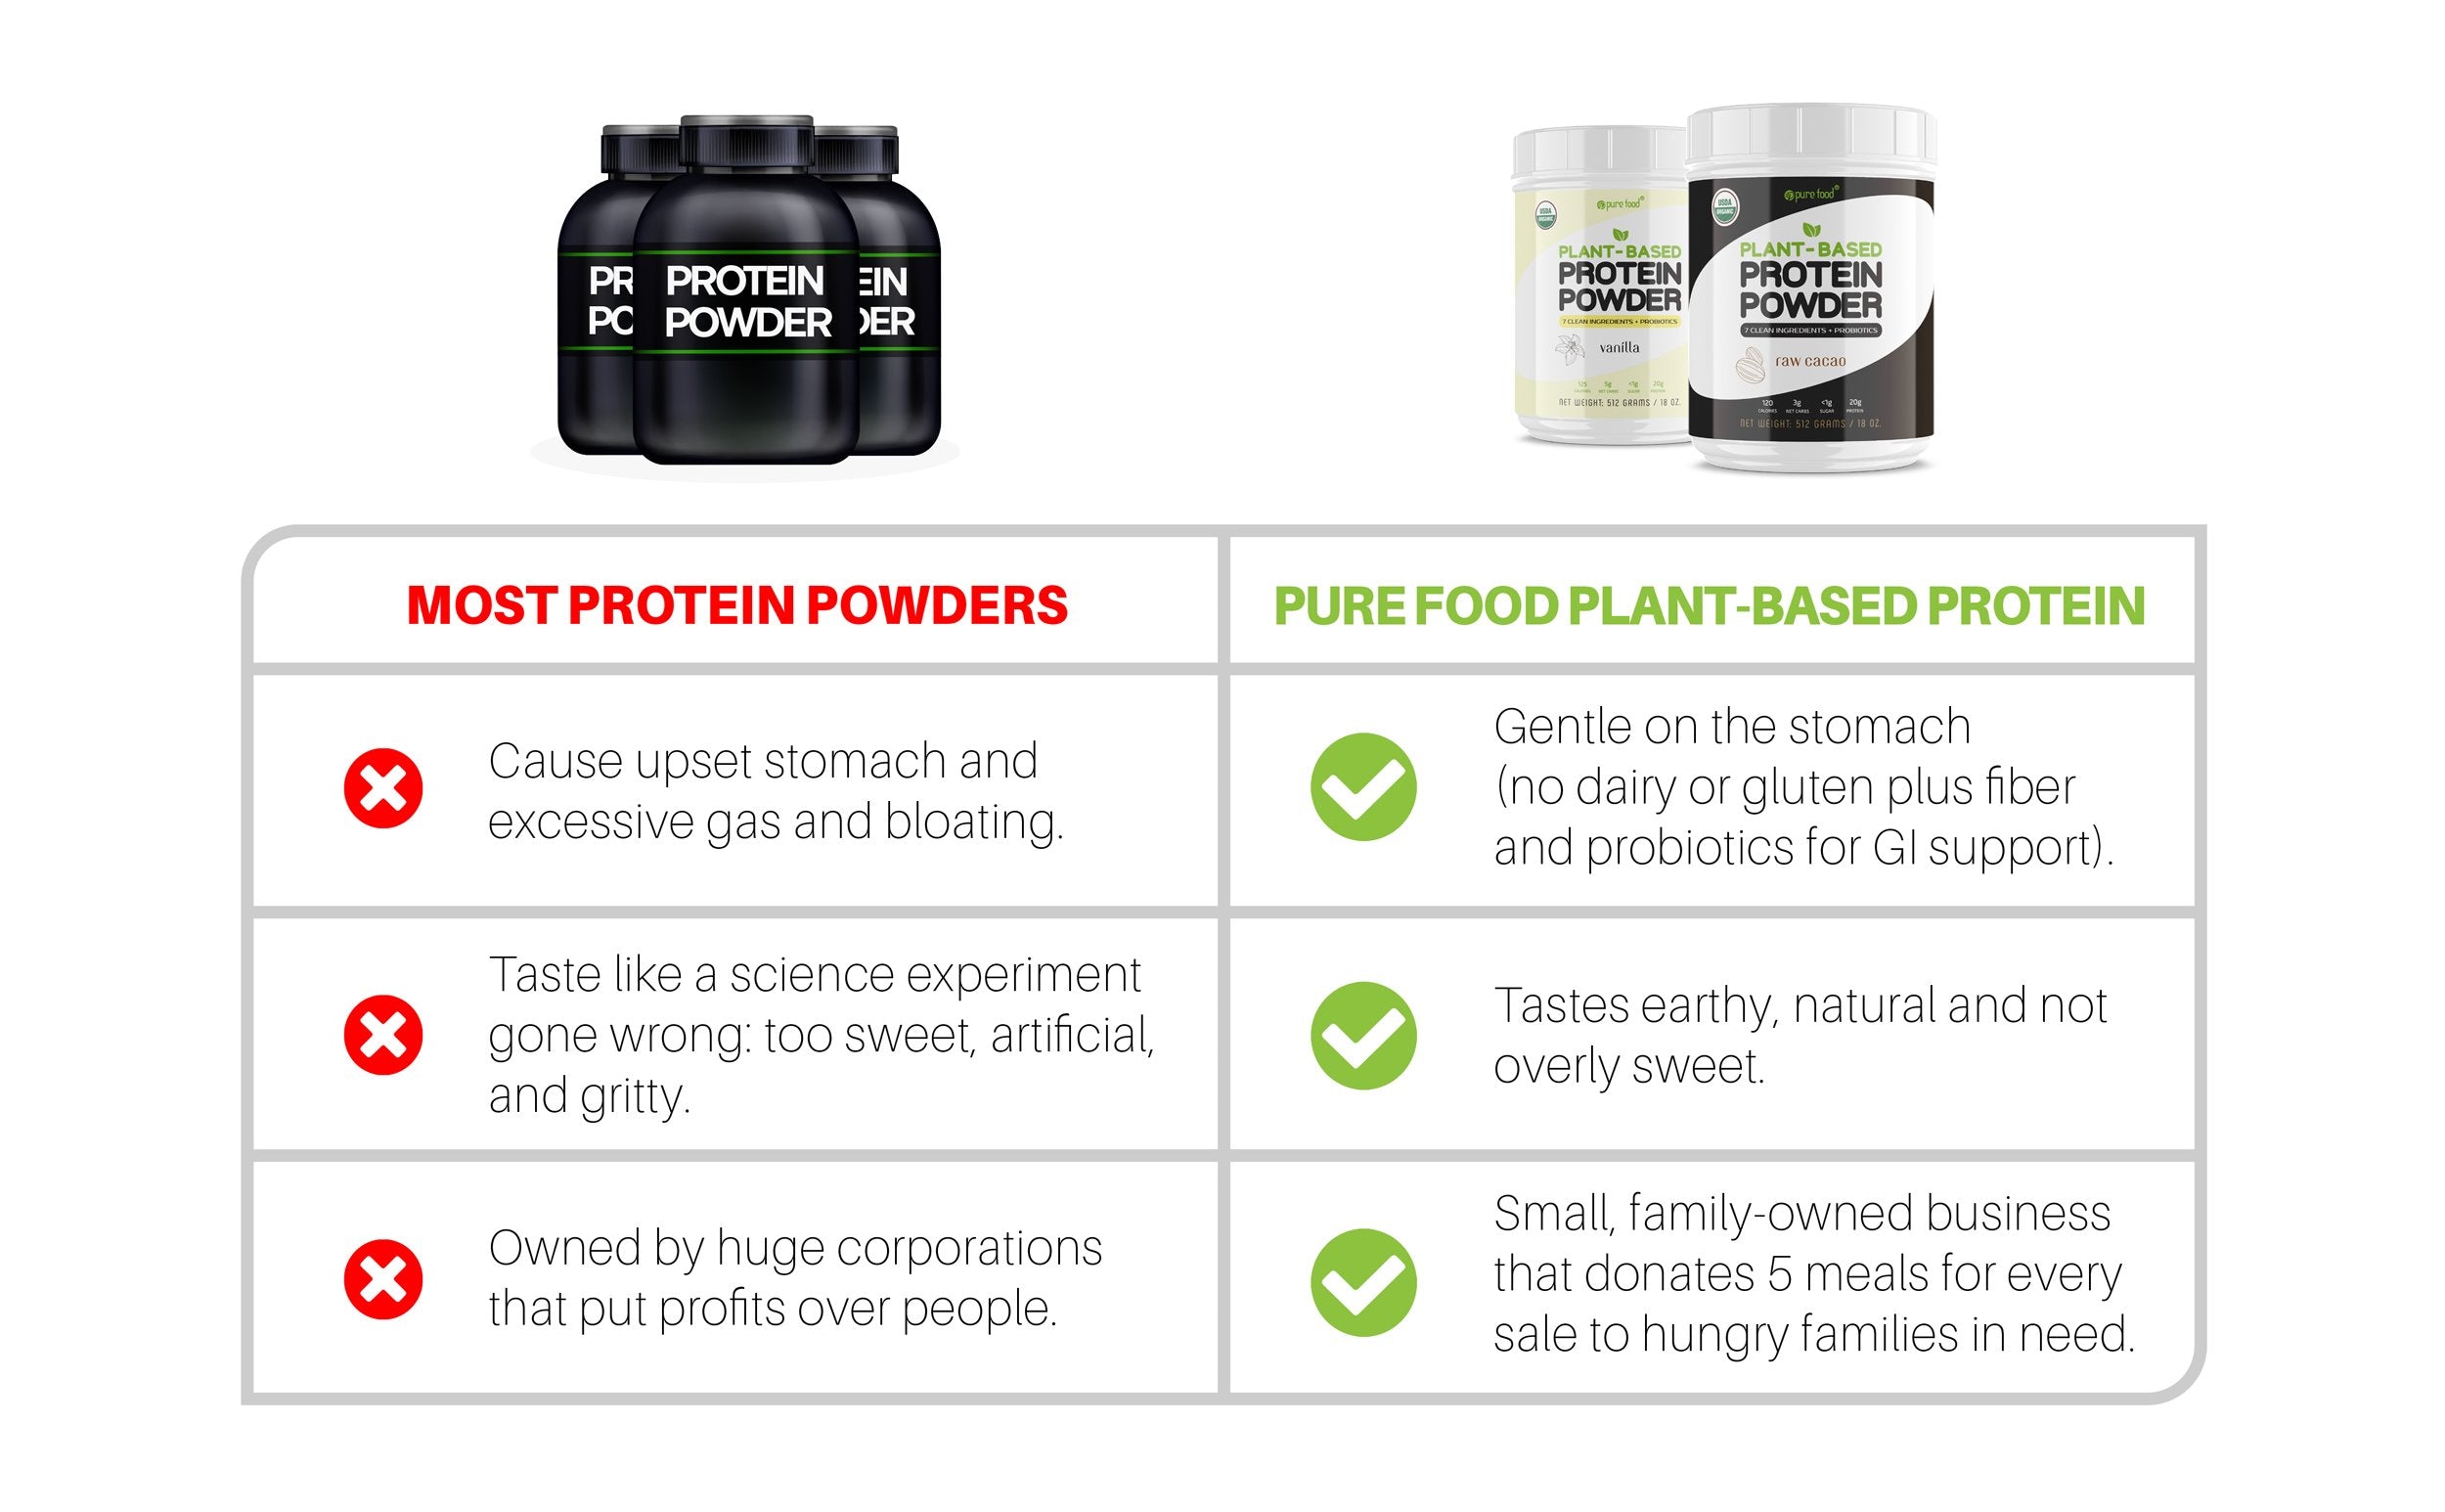 Pure Food Chocolate Protein + Chocolate Real Meal + DIGEST Bundle vegan protein powder Pure Food Digestive Health 